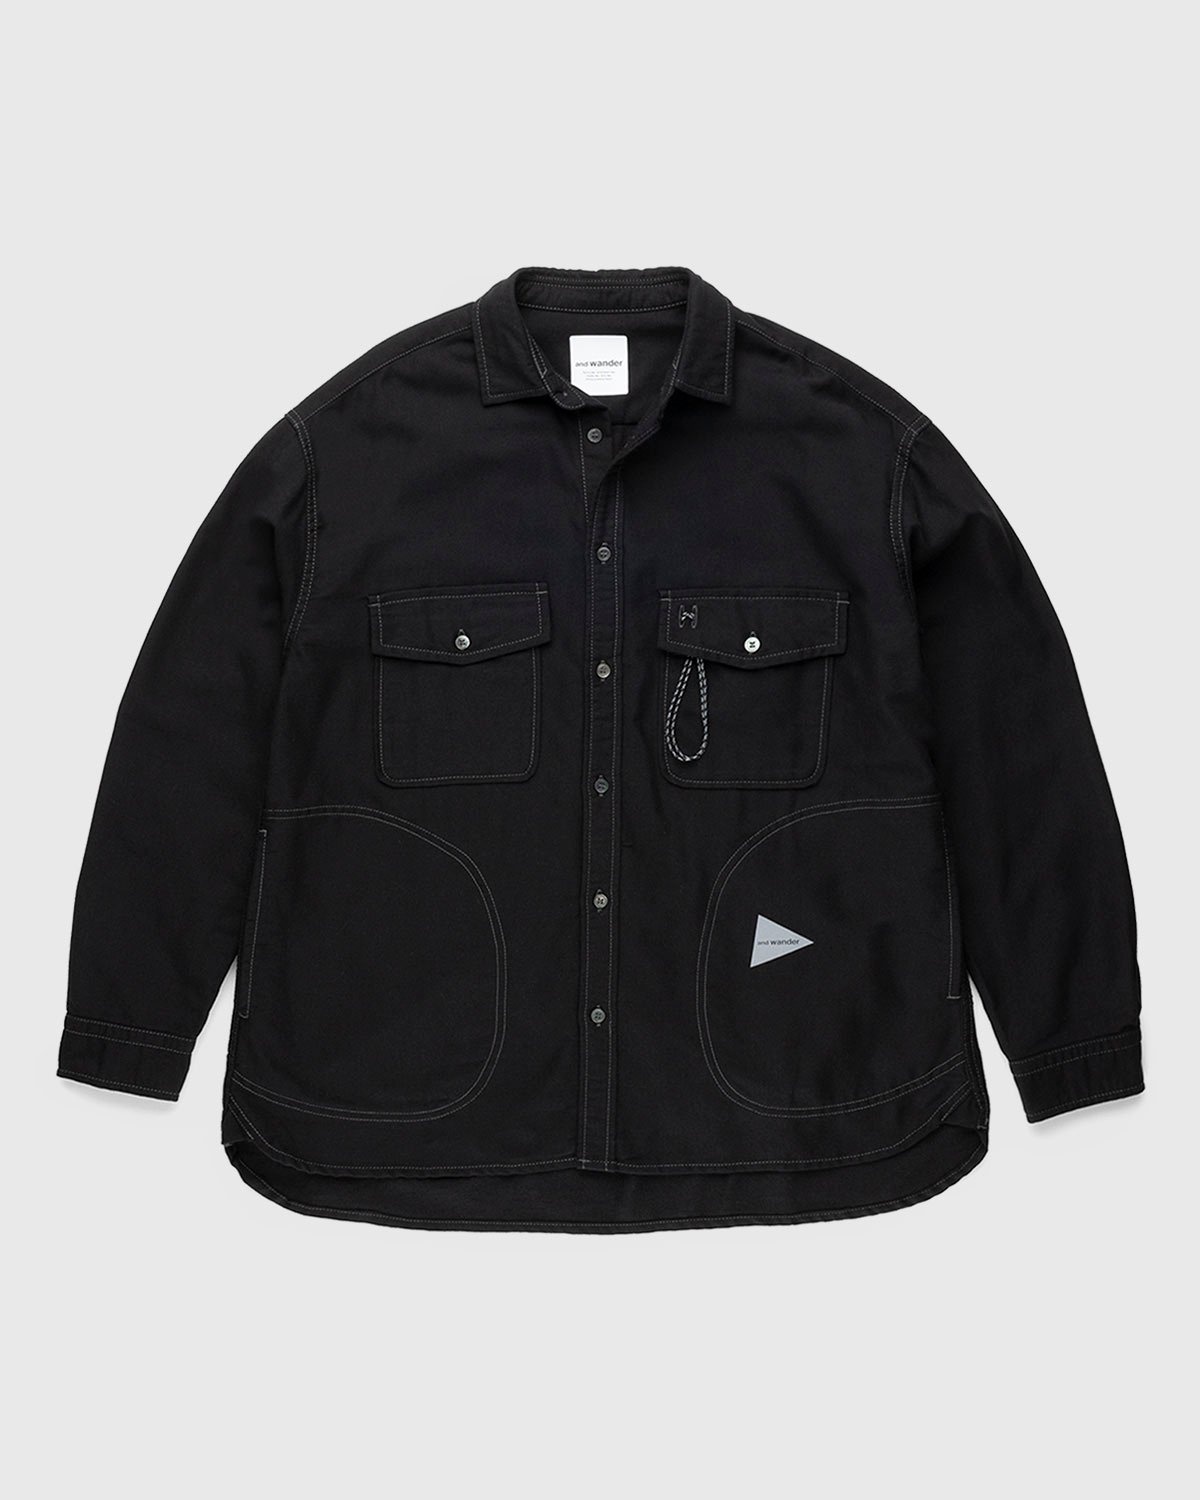 And Wander – Thermonel Pullover Shirt (M) Black - Outerwear - Black - Image 1